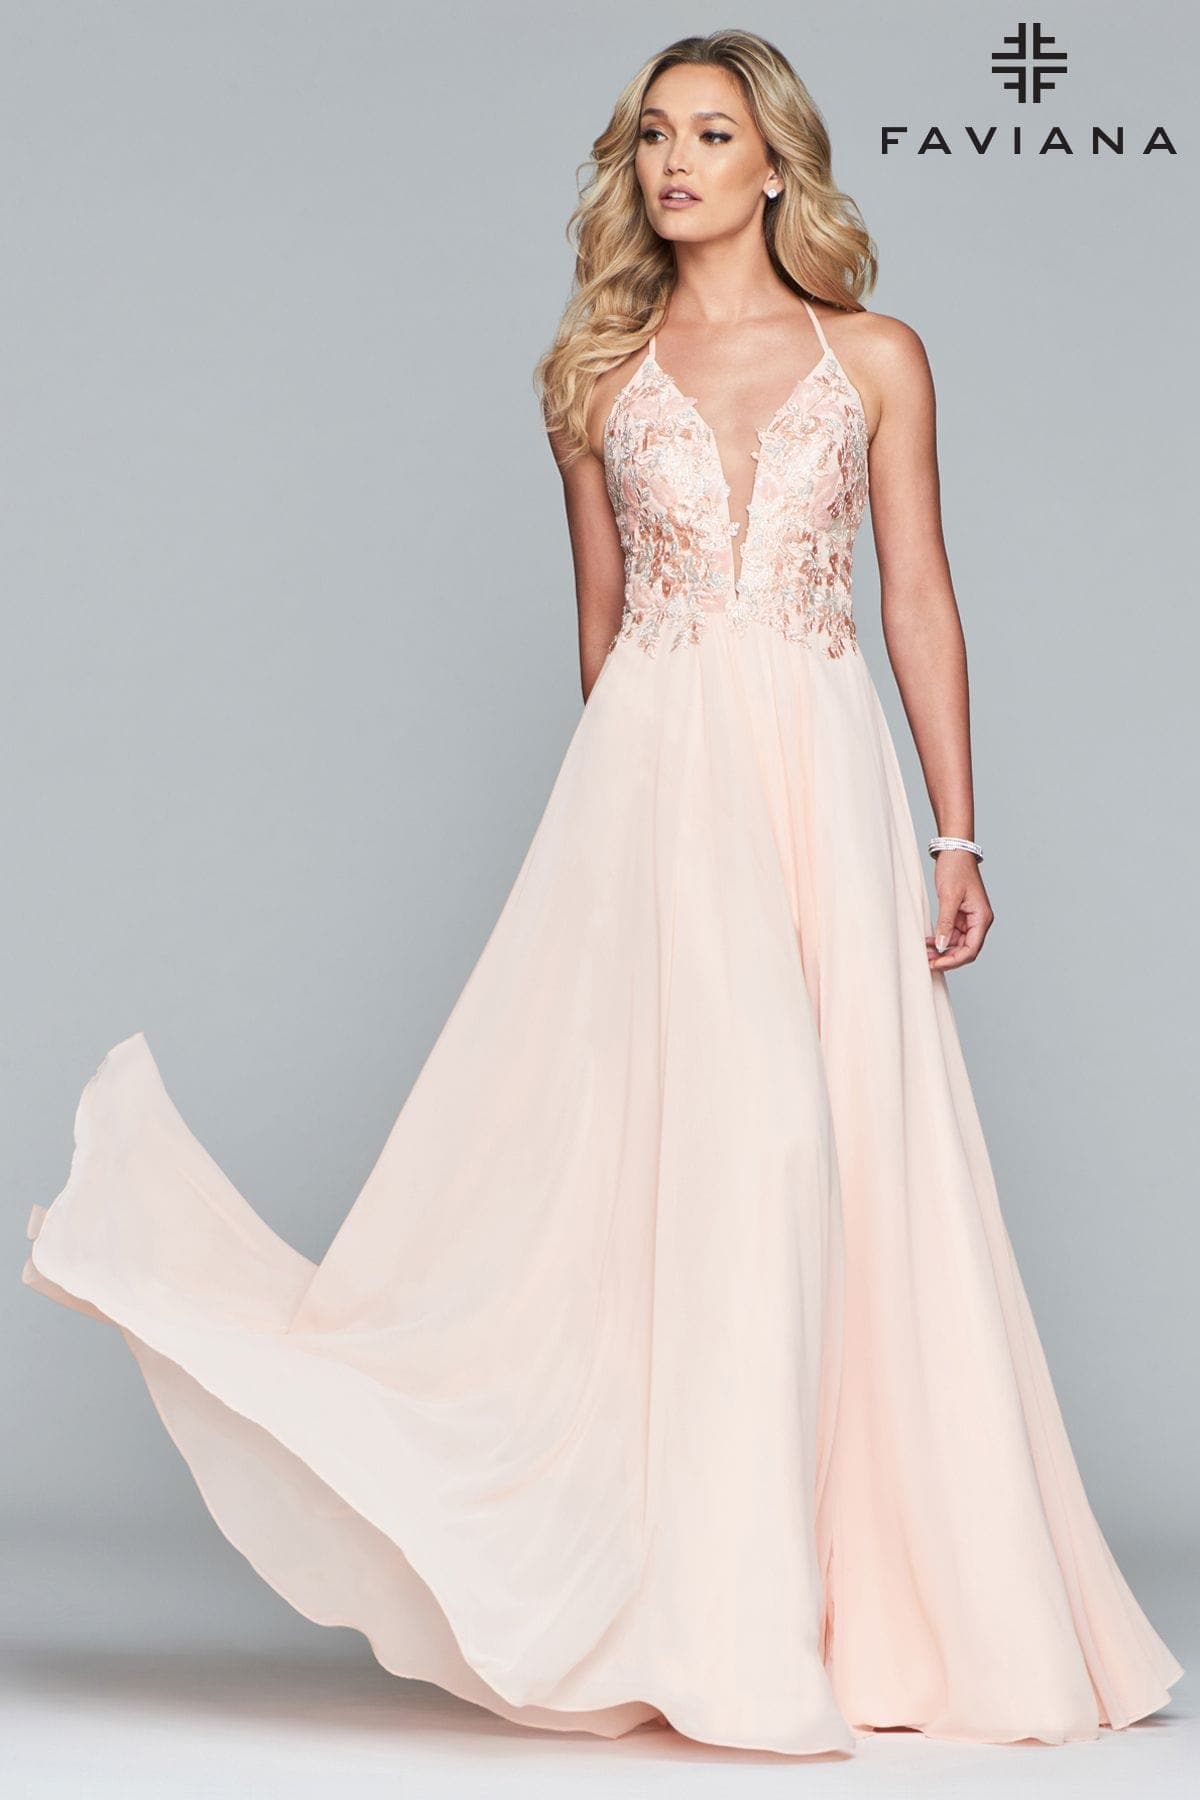 Deep V Neck Long Dress With Chiffon And Applique Bodice